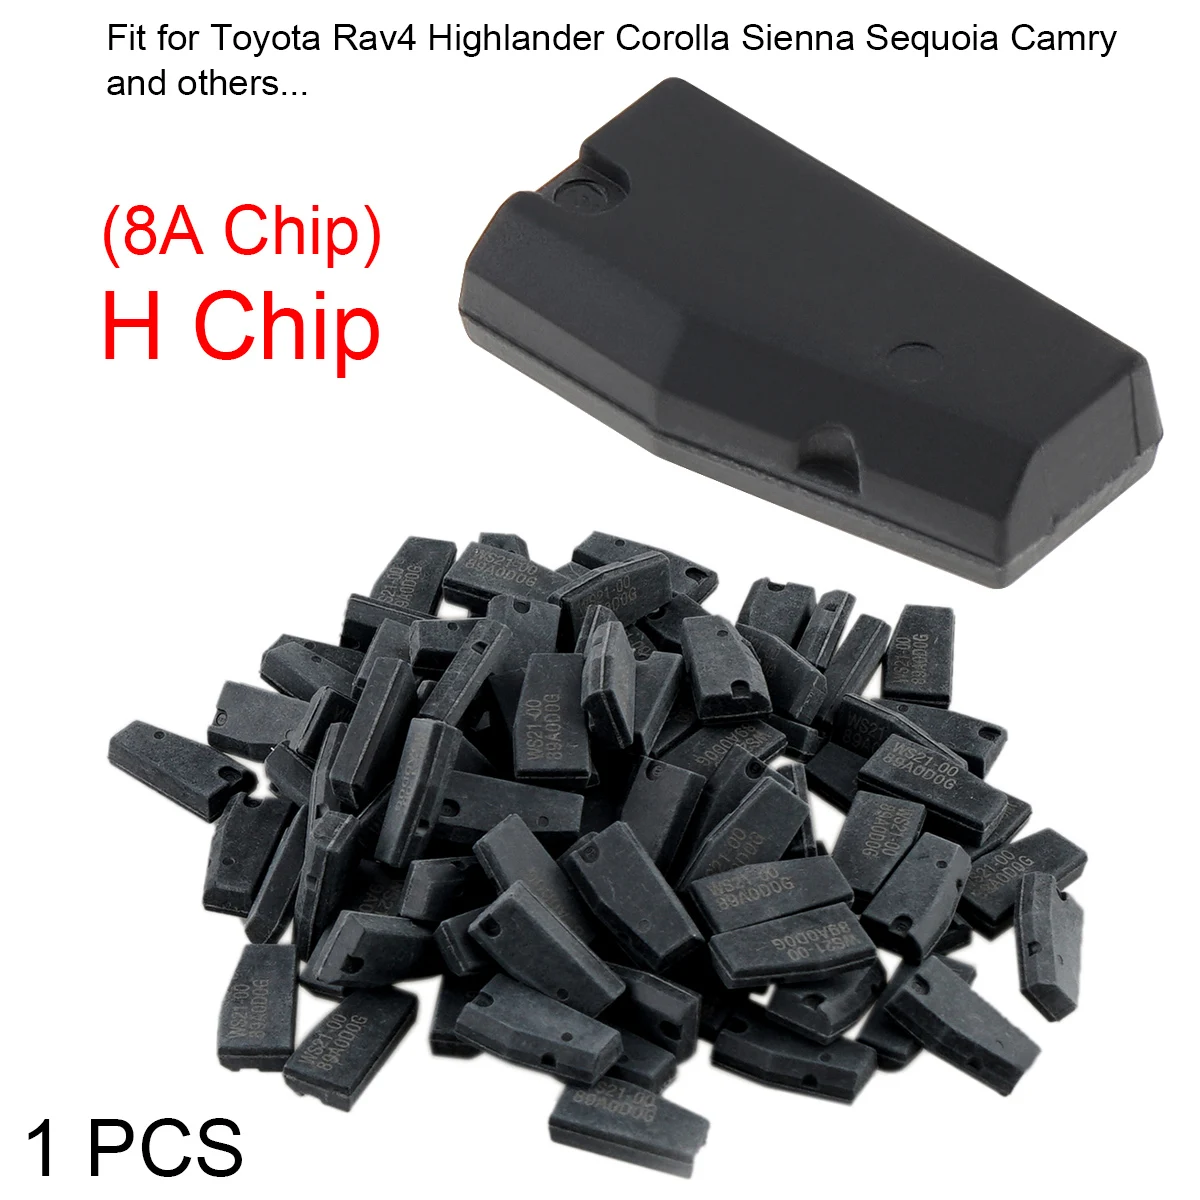 Blank H 8A 128Bits Carbon Chip Car Key Transponder Chip Replacement Fit for Toyota Rav4 Highlander Corolla Sienna Sequoia Camry